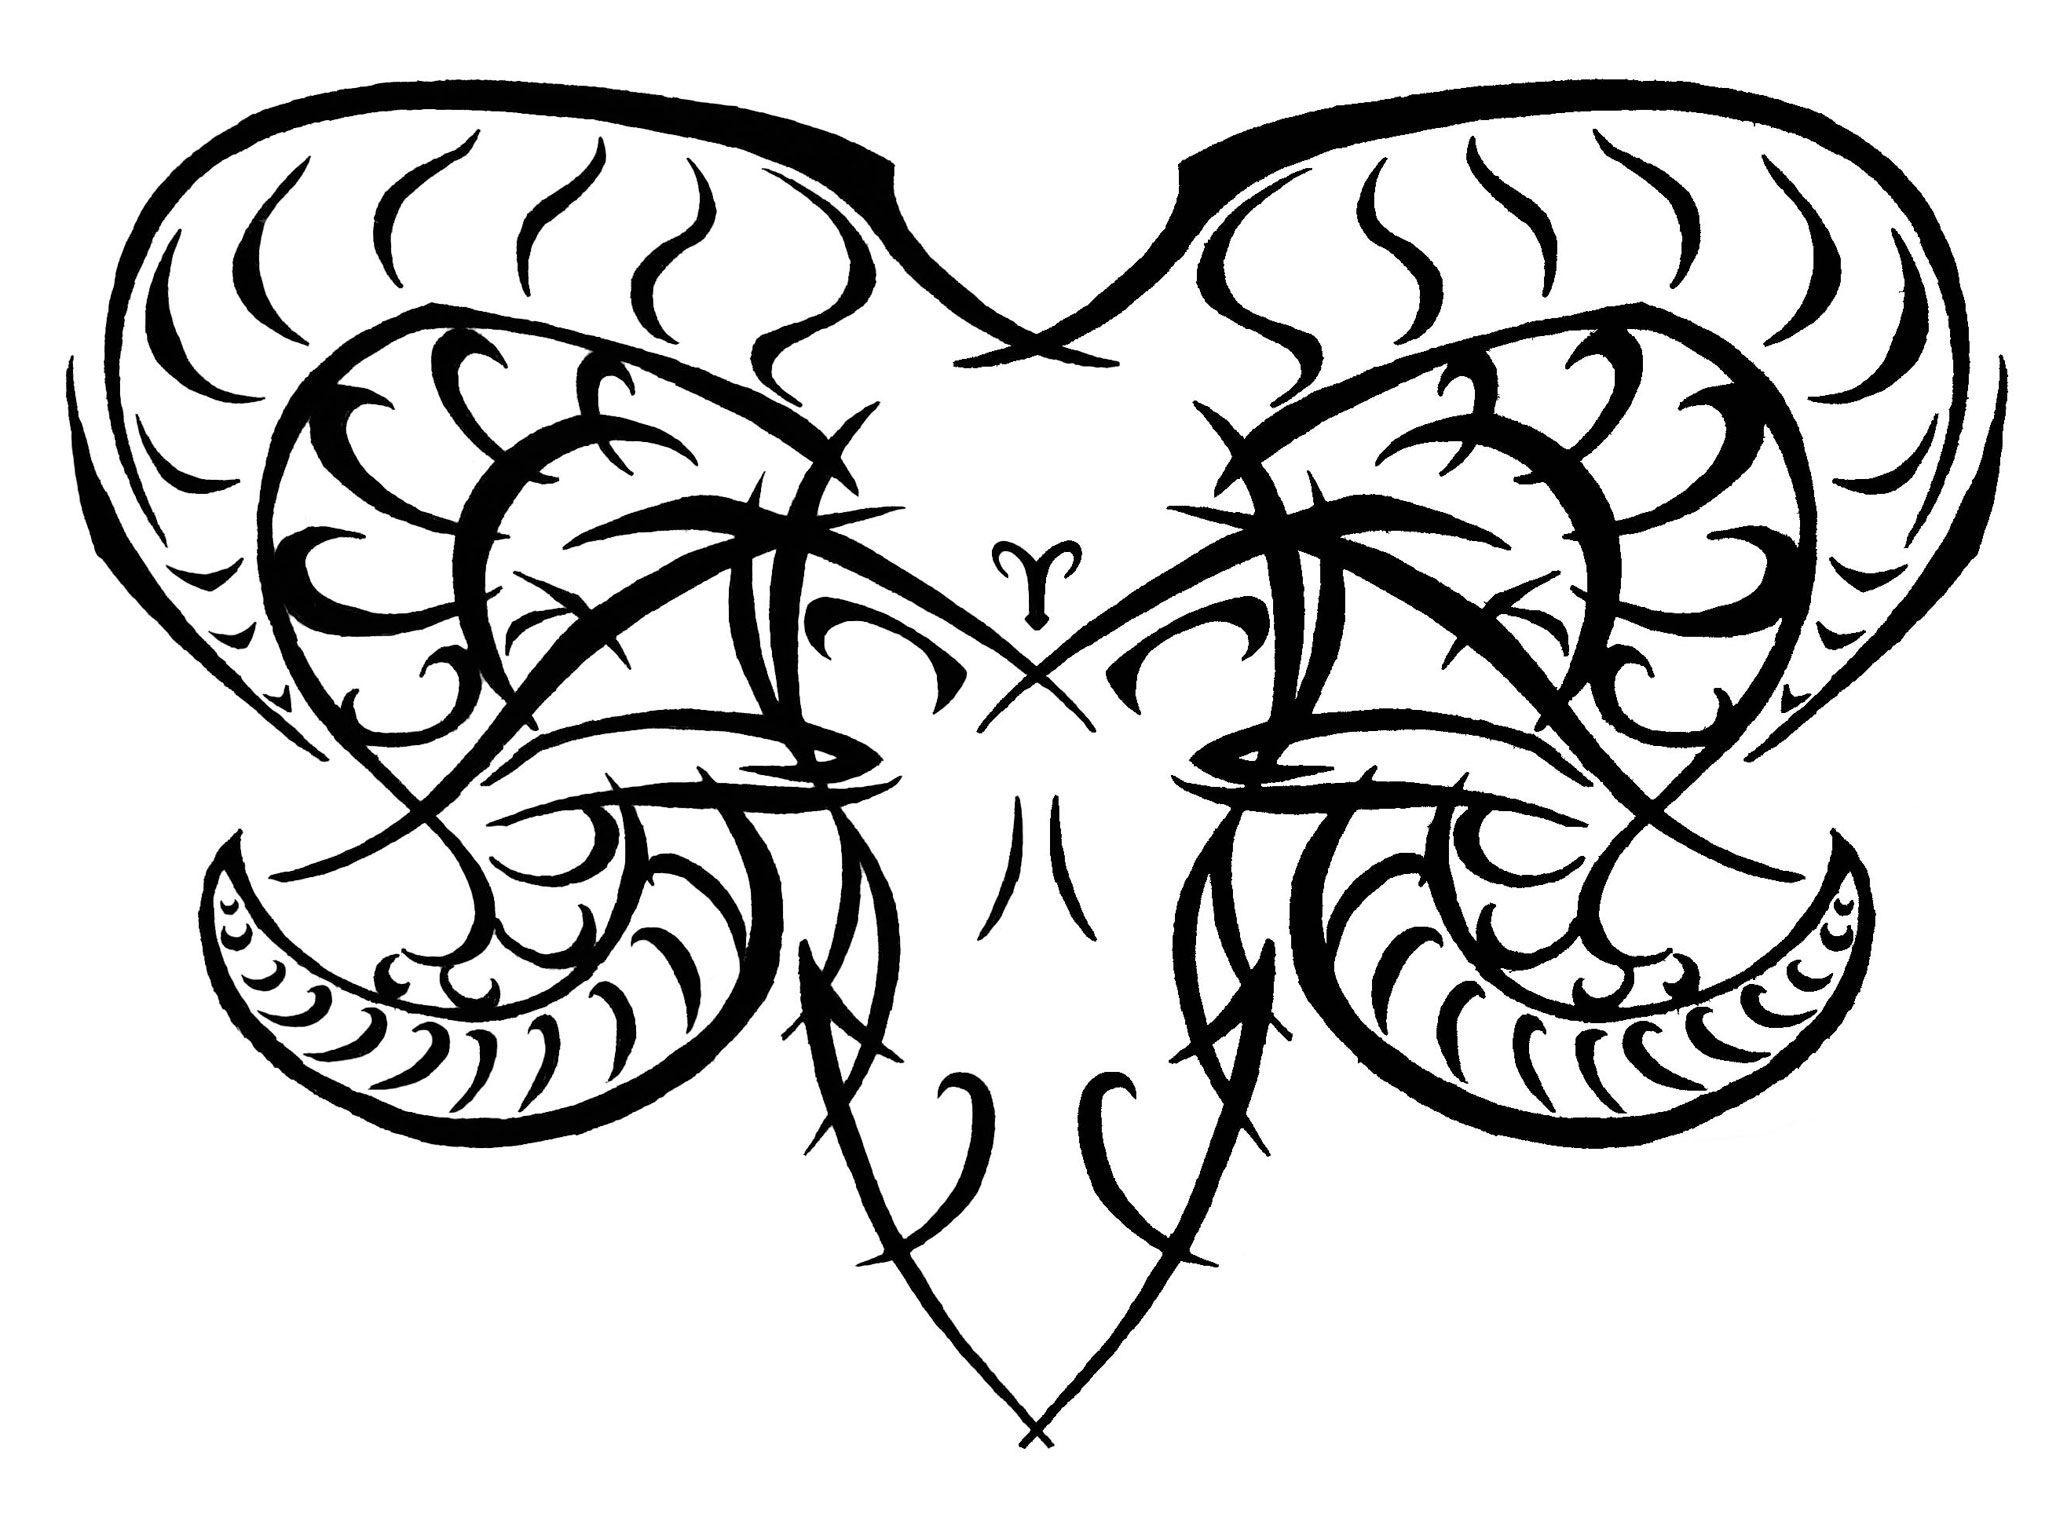 Aries Flower Tattoo Designs Aries Tattoos Designs, Ideas And Meaning.